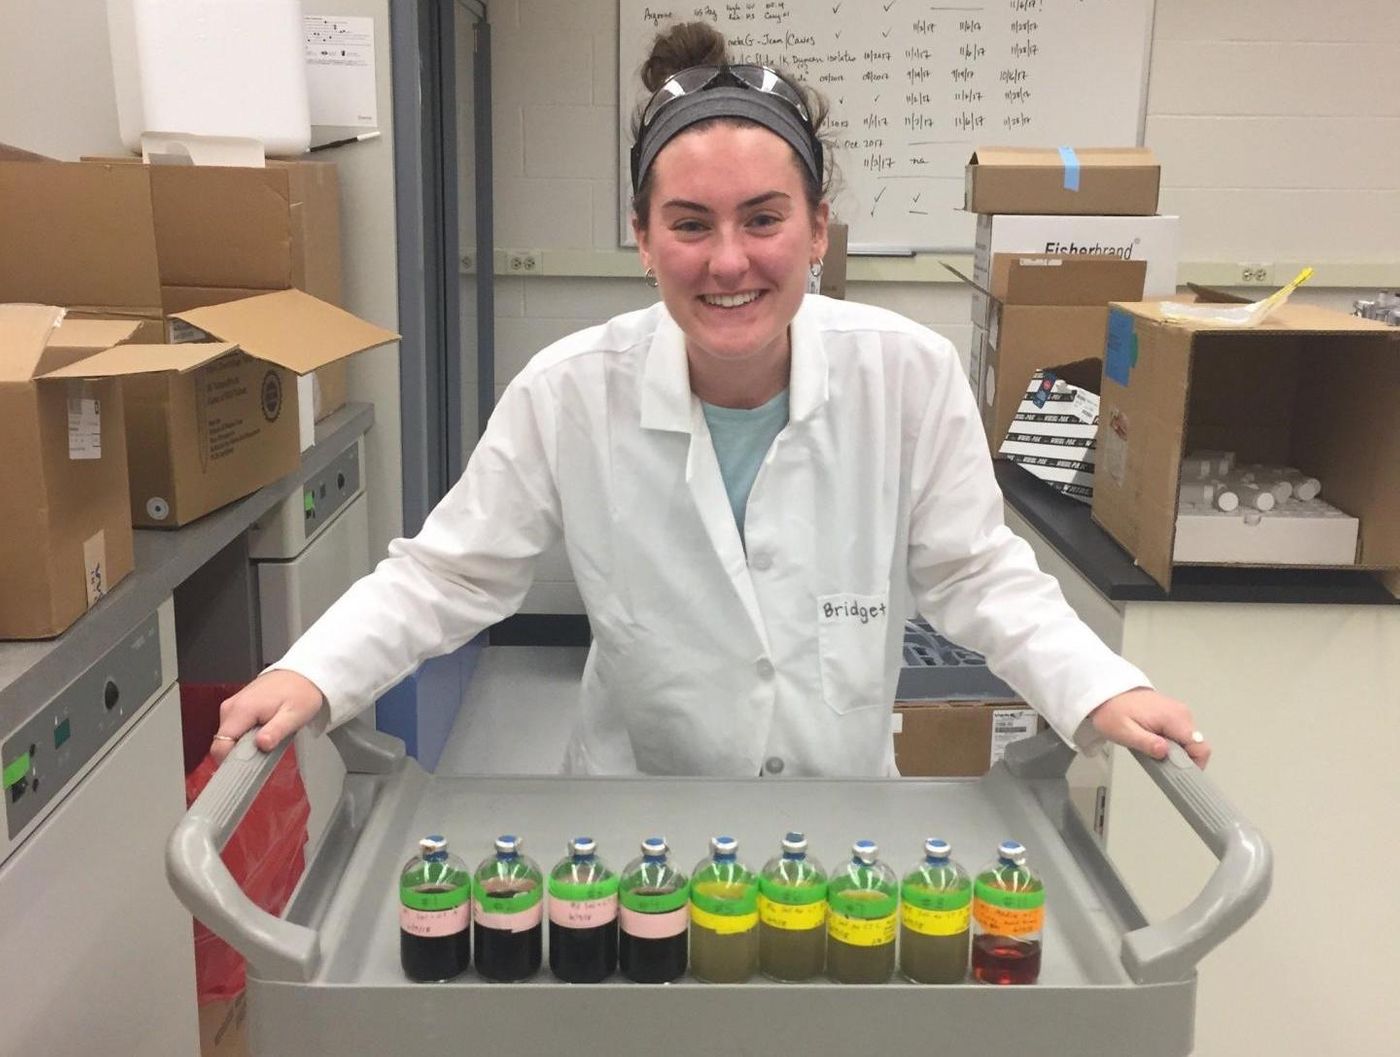 Lead author Bridget McGivern in June 2018, shortly after setup of the soil experiment. / Credit: Provided/Bridget McGivern